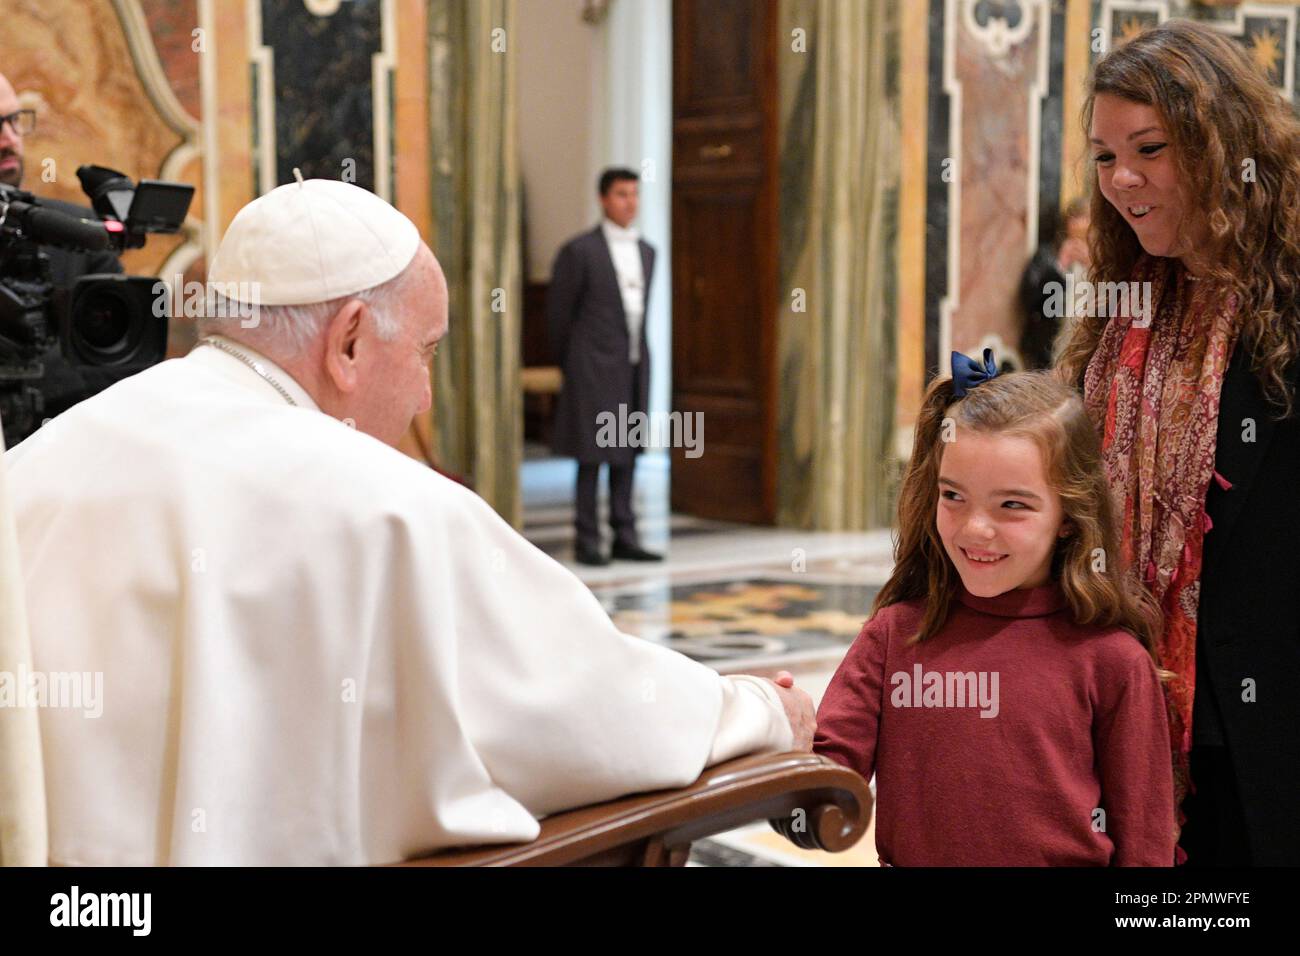 Vatican, Vatican. 15th Apr, 2023. Italy, Rome, Vatican, 2023/4/15.Pope Francis receives in audience Members of the Fundaciòn Madre de la Esperanza de Talavera de la Reina, of Toledo ( Spain ) at the Vatican Photograph by Vatican Media /Catholic Press Photo/hANS lUCAS . RESTRICTED TO EDITORIAL USE - NO MARKETING - NO ADVERTISING CAMPAIGNS. Credit: Independent Photo Agency/Alamy Live News Stock Photo